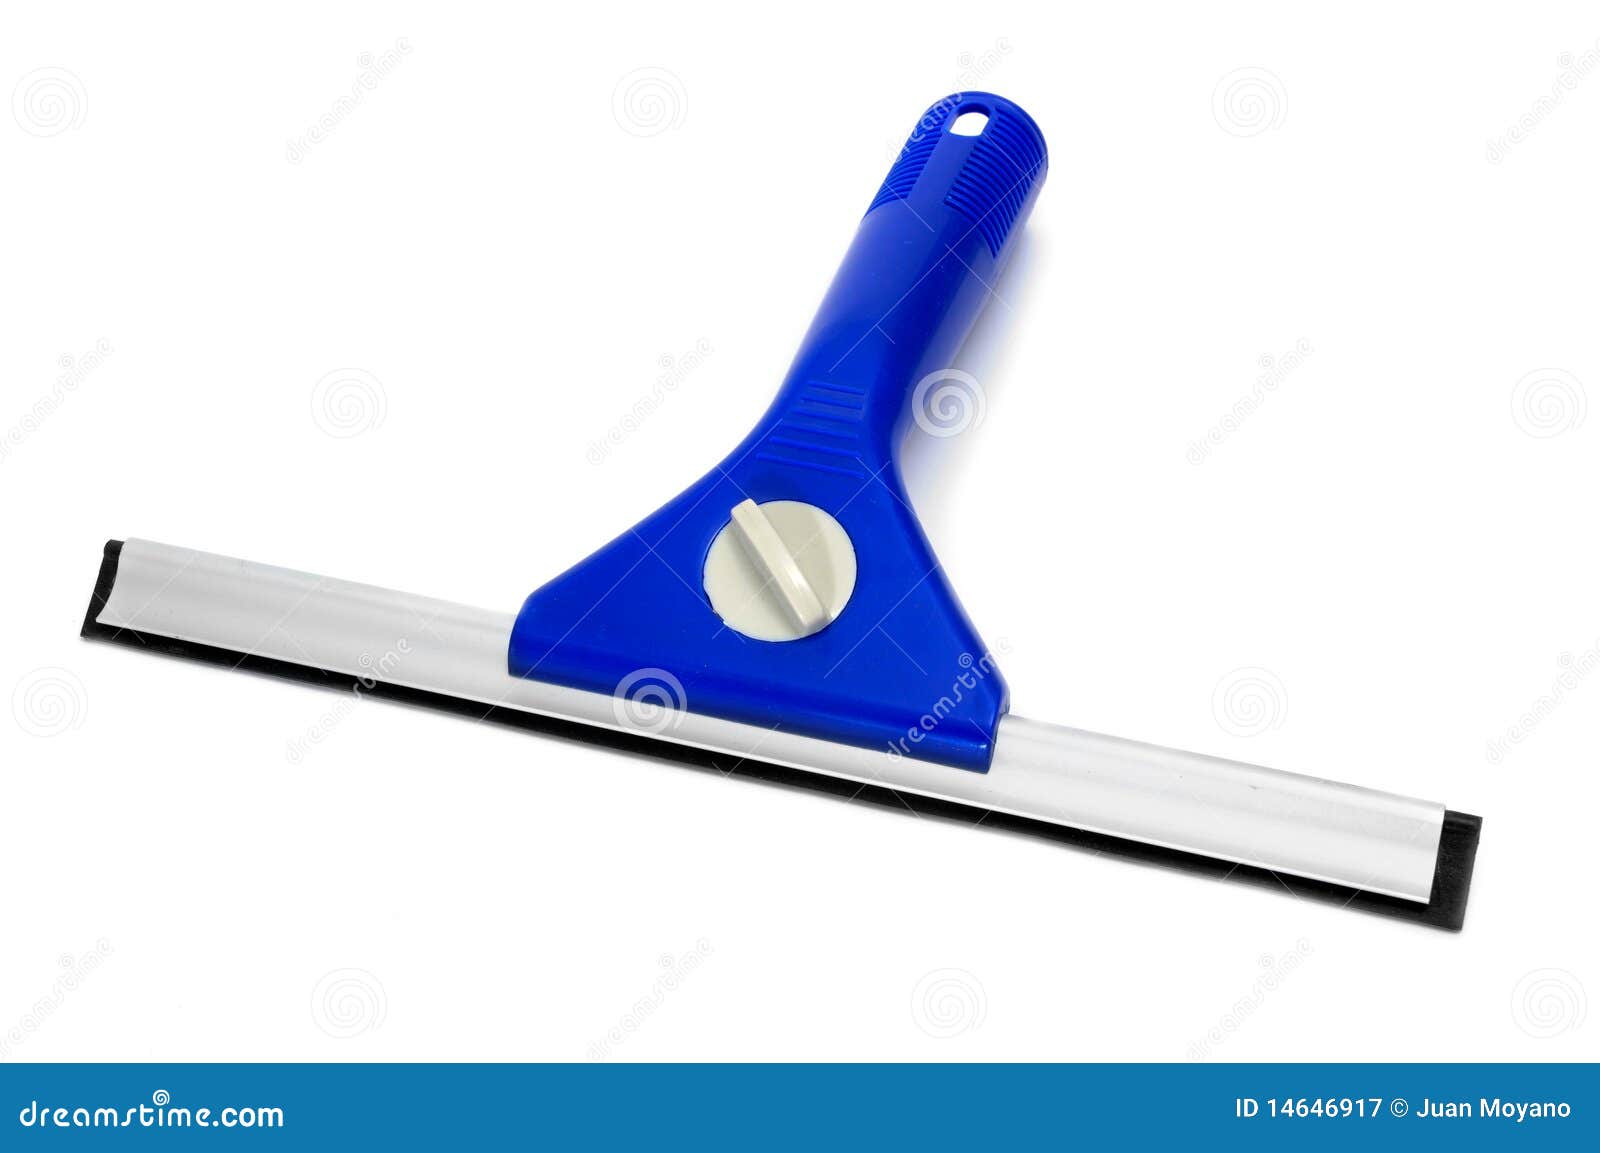 window squeegee clipart - photo #16